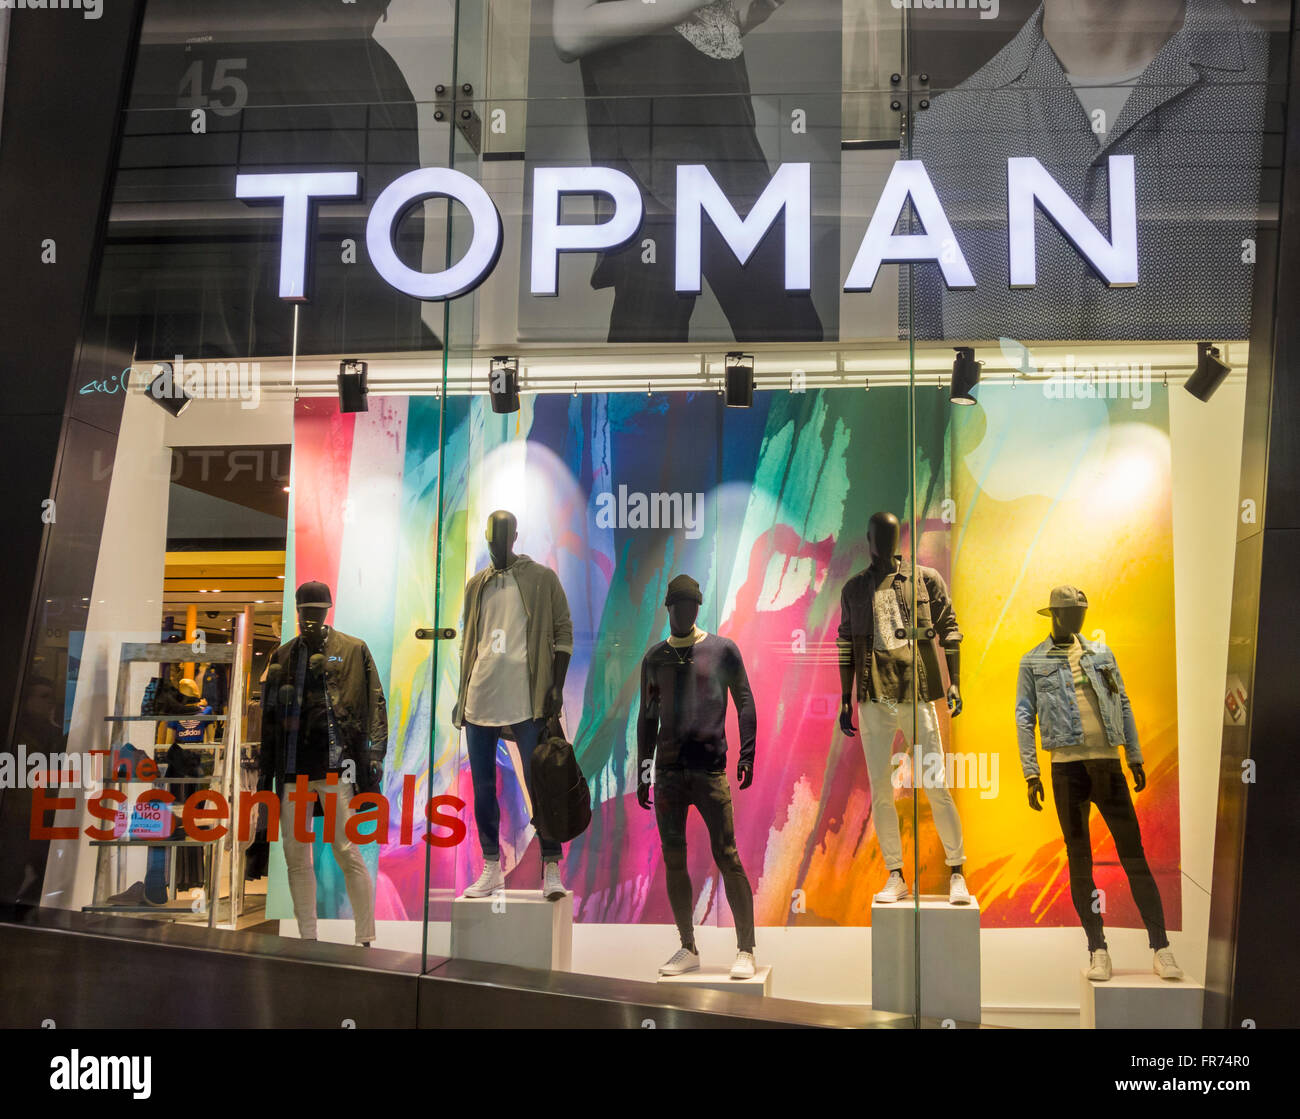 Topman clothing store in Eldon Square shopping centre, Newcastle upon ...